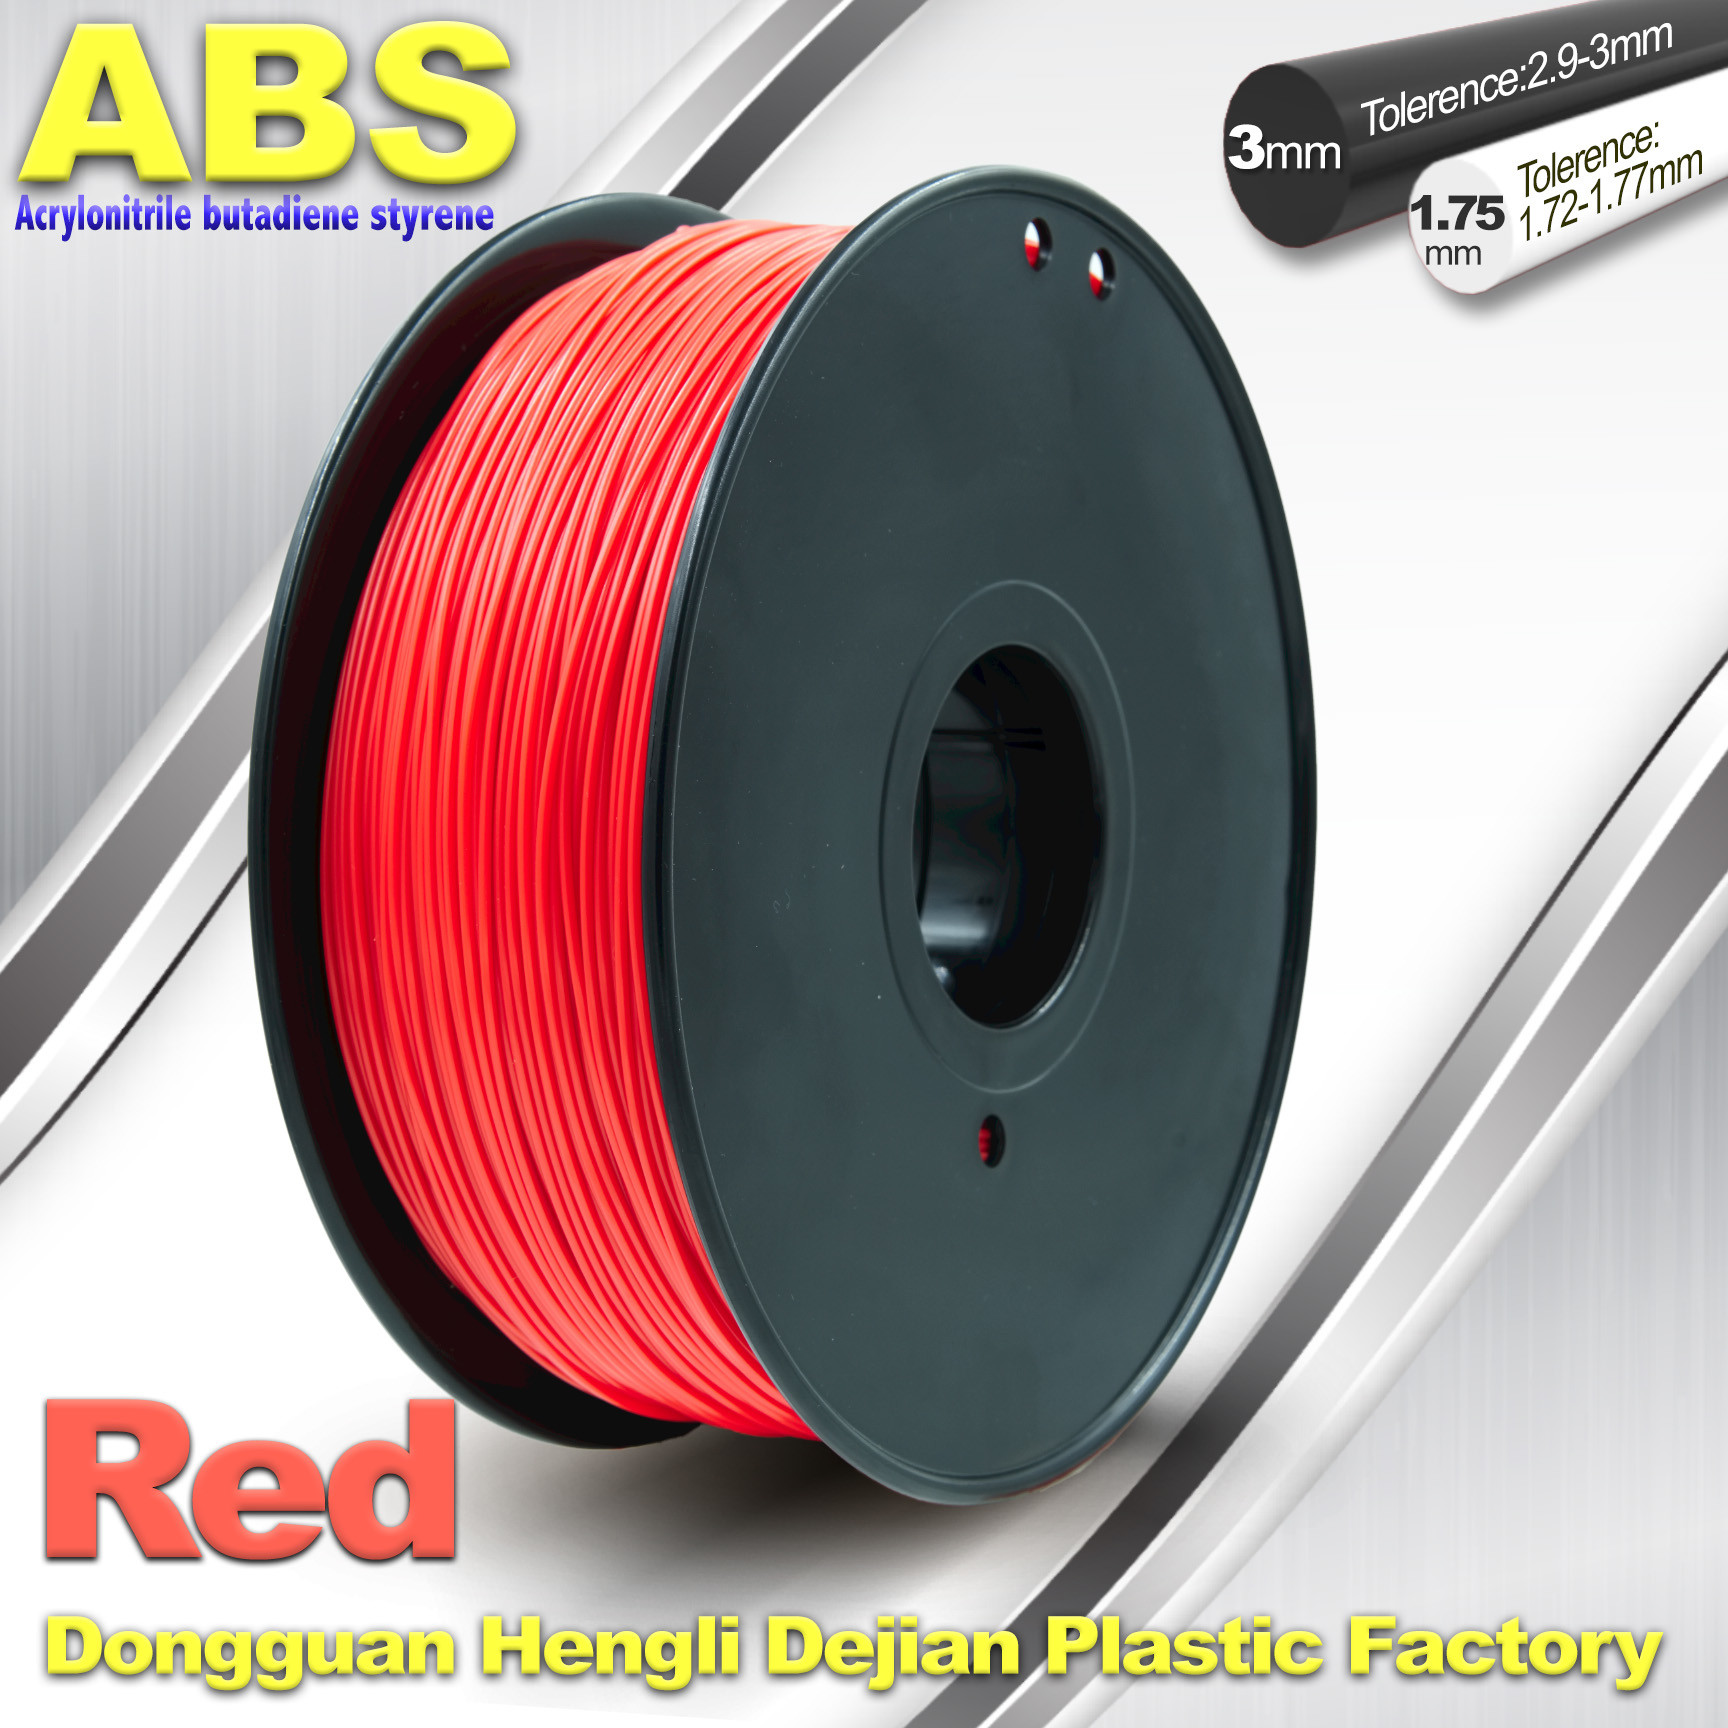 China 1.75mm /  3.0mm ABS 3d Printer Filament Red With Good Elasticity wholesale